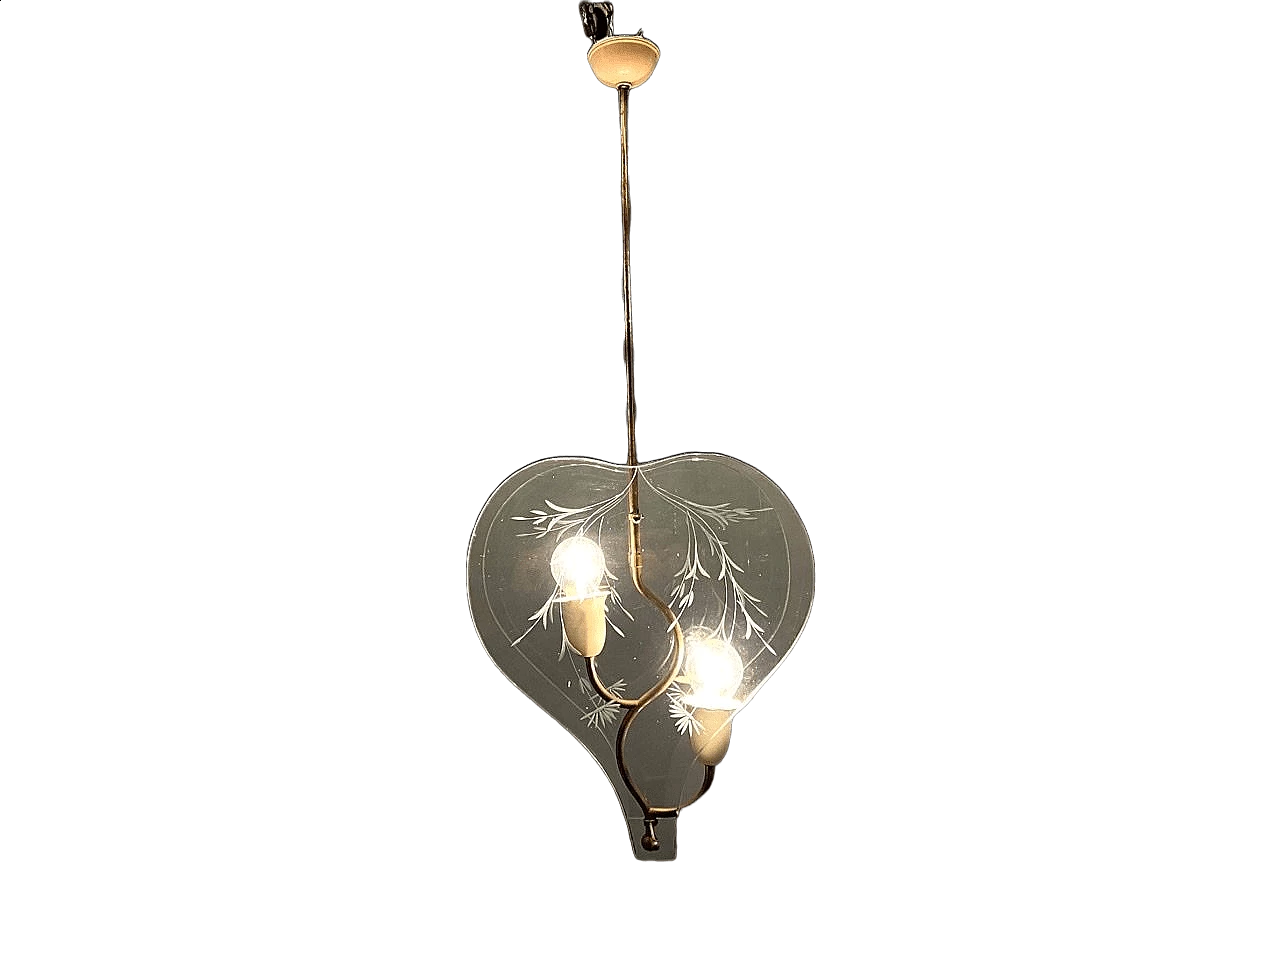 Etched glass chandelier by Pietro Chiesa, 1940s 1470315